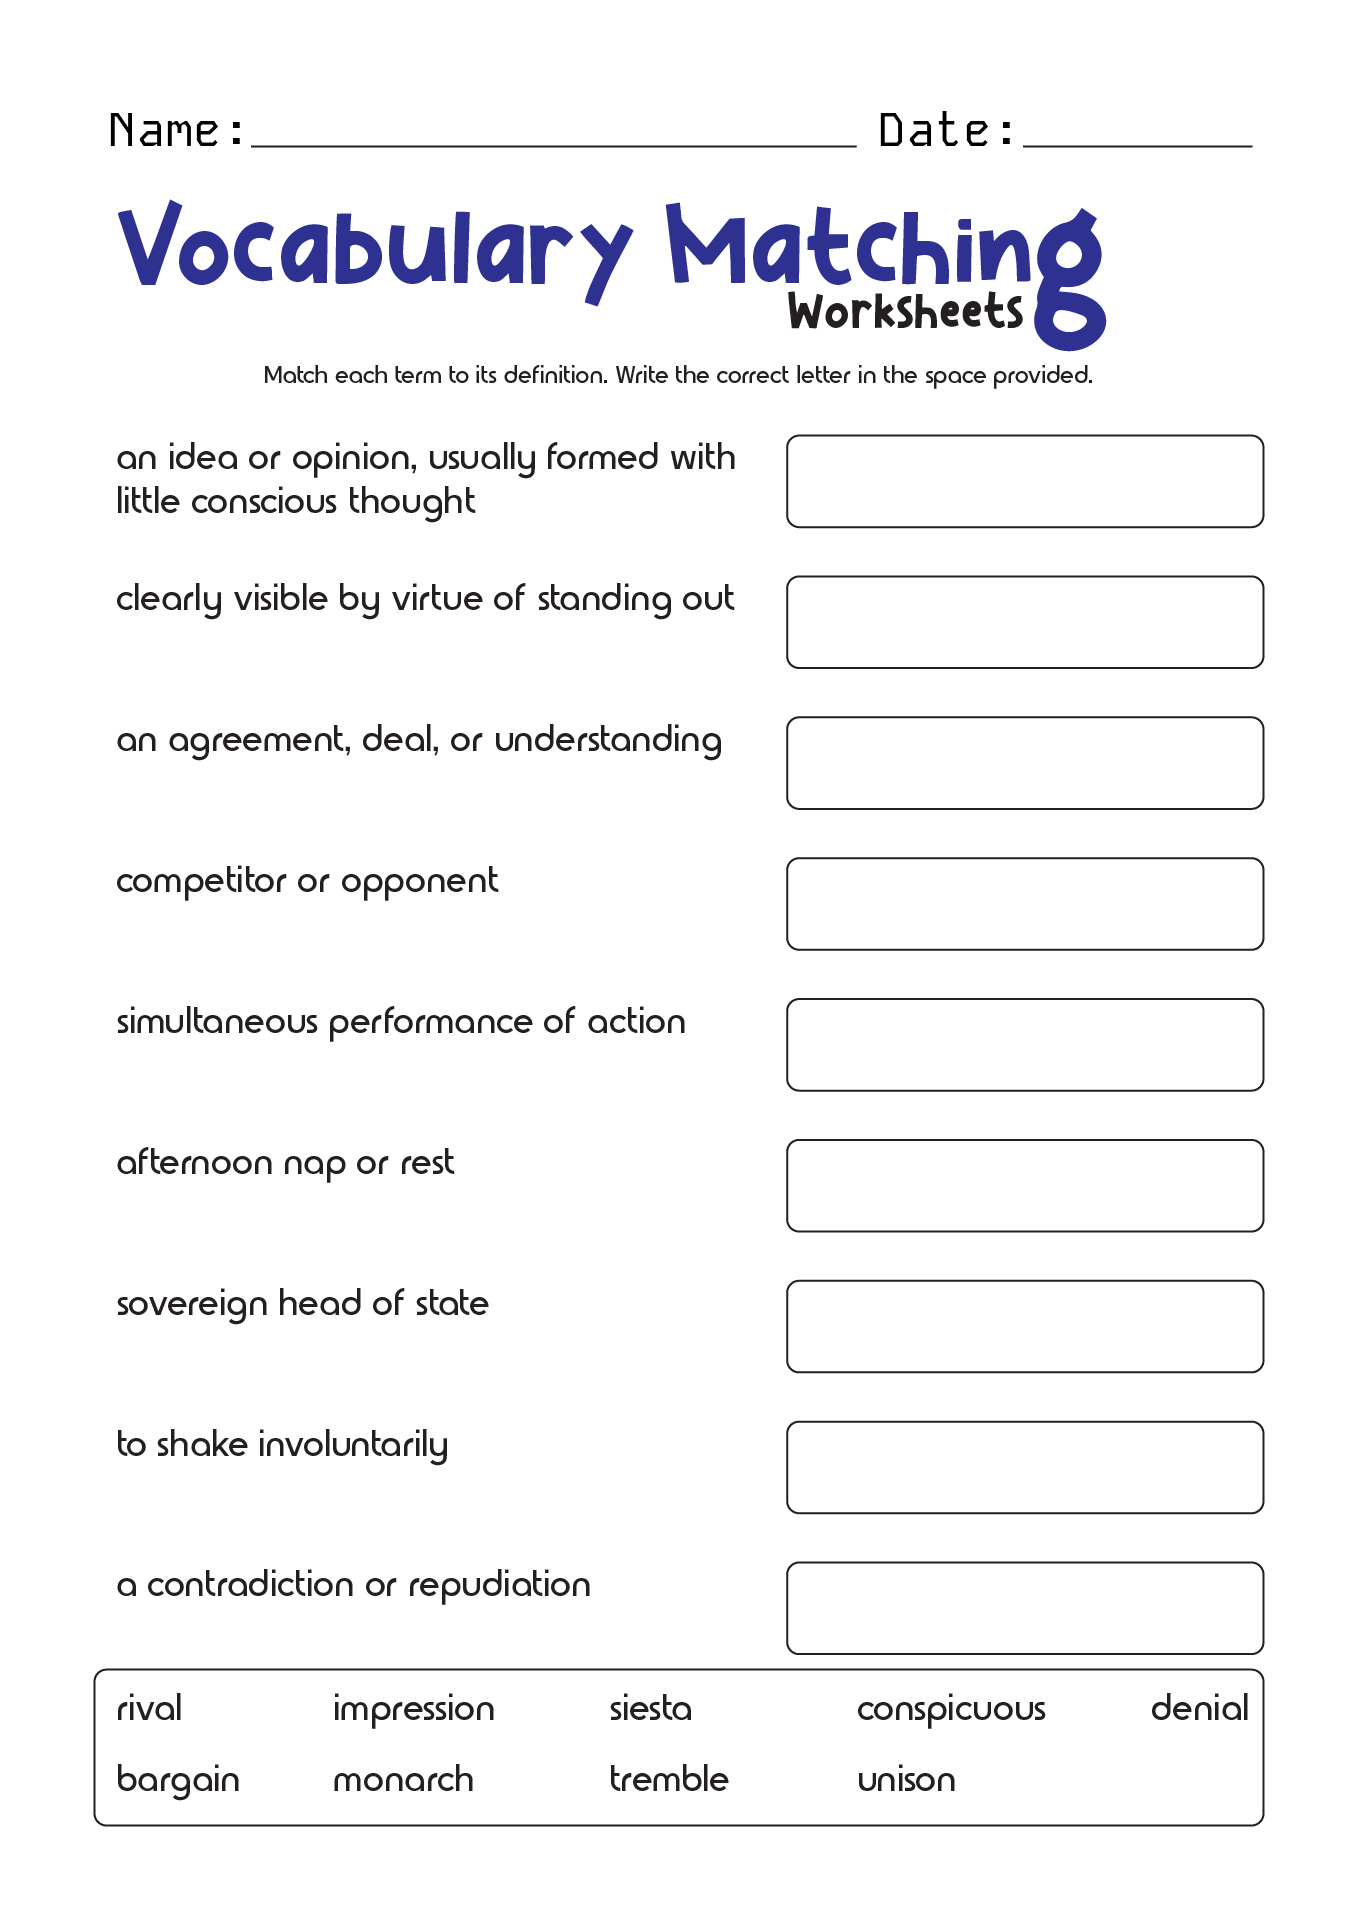 14-best-images-of-matching-definitions-to-words-worksheets-2nd-grade